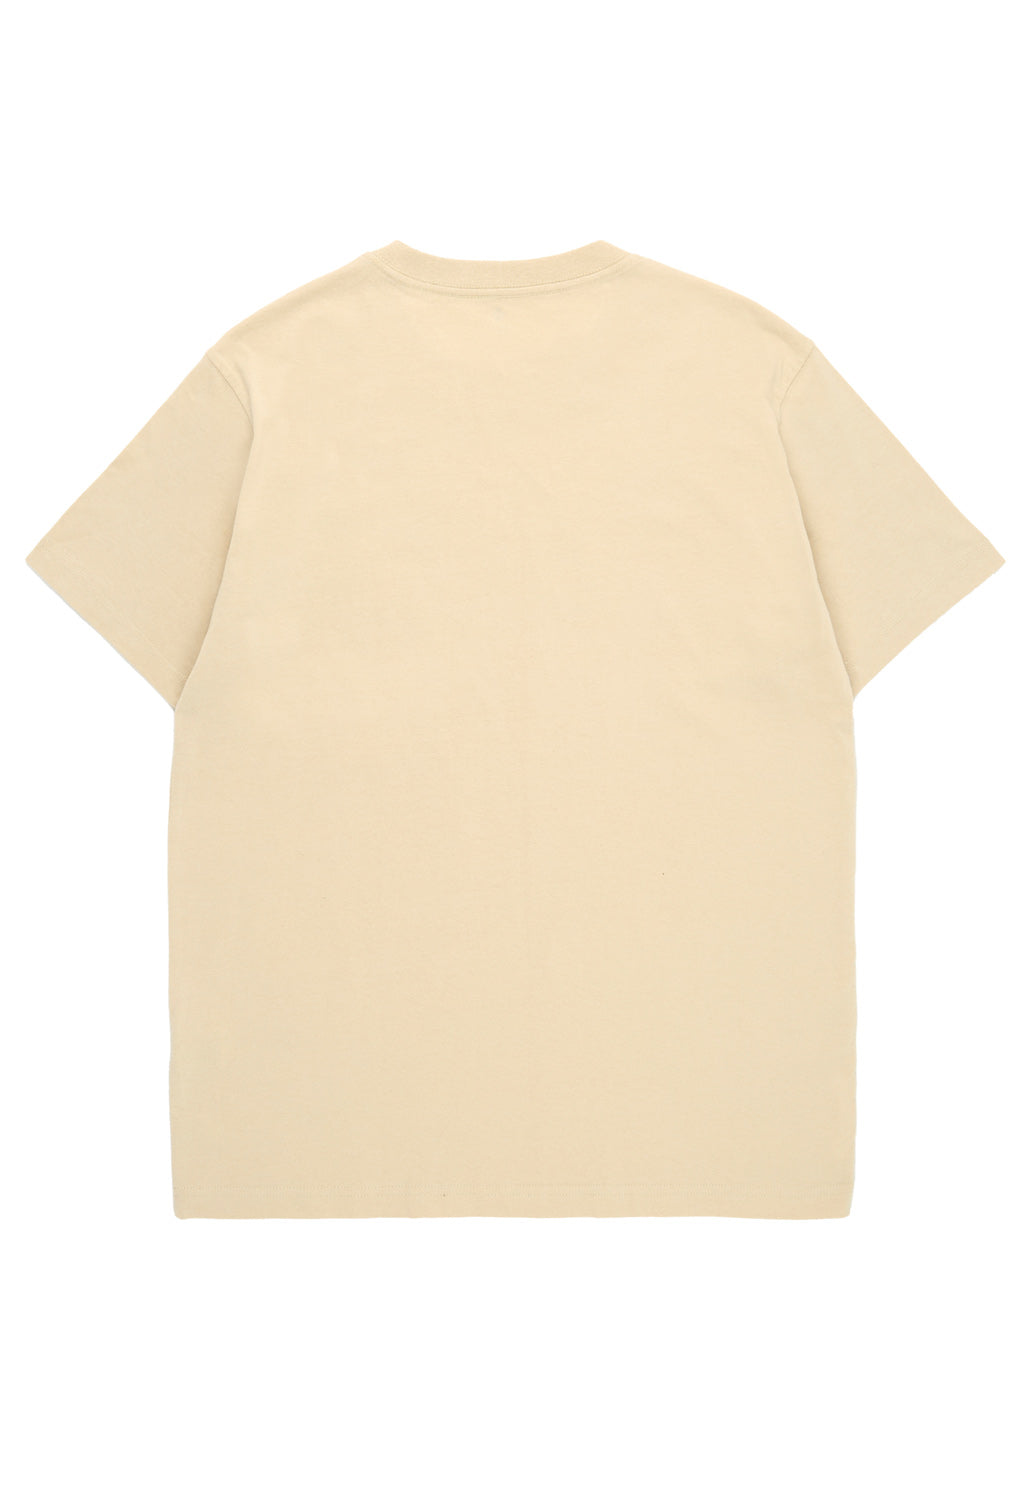 Montbell Pear Skin Cotton Ito T-Shirt - Ivory